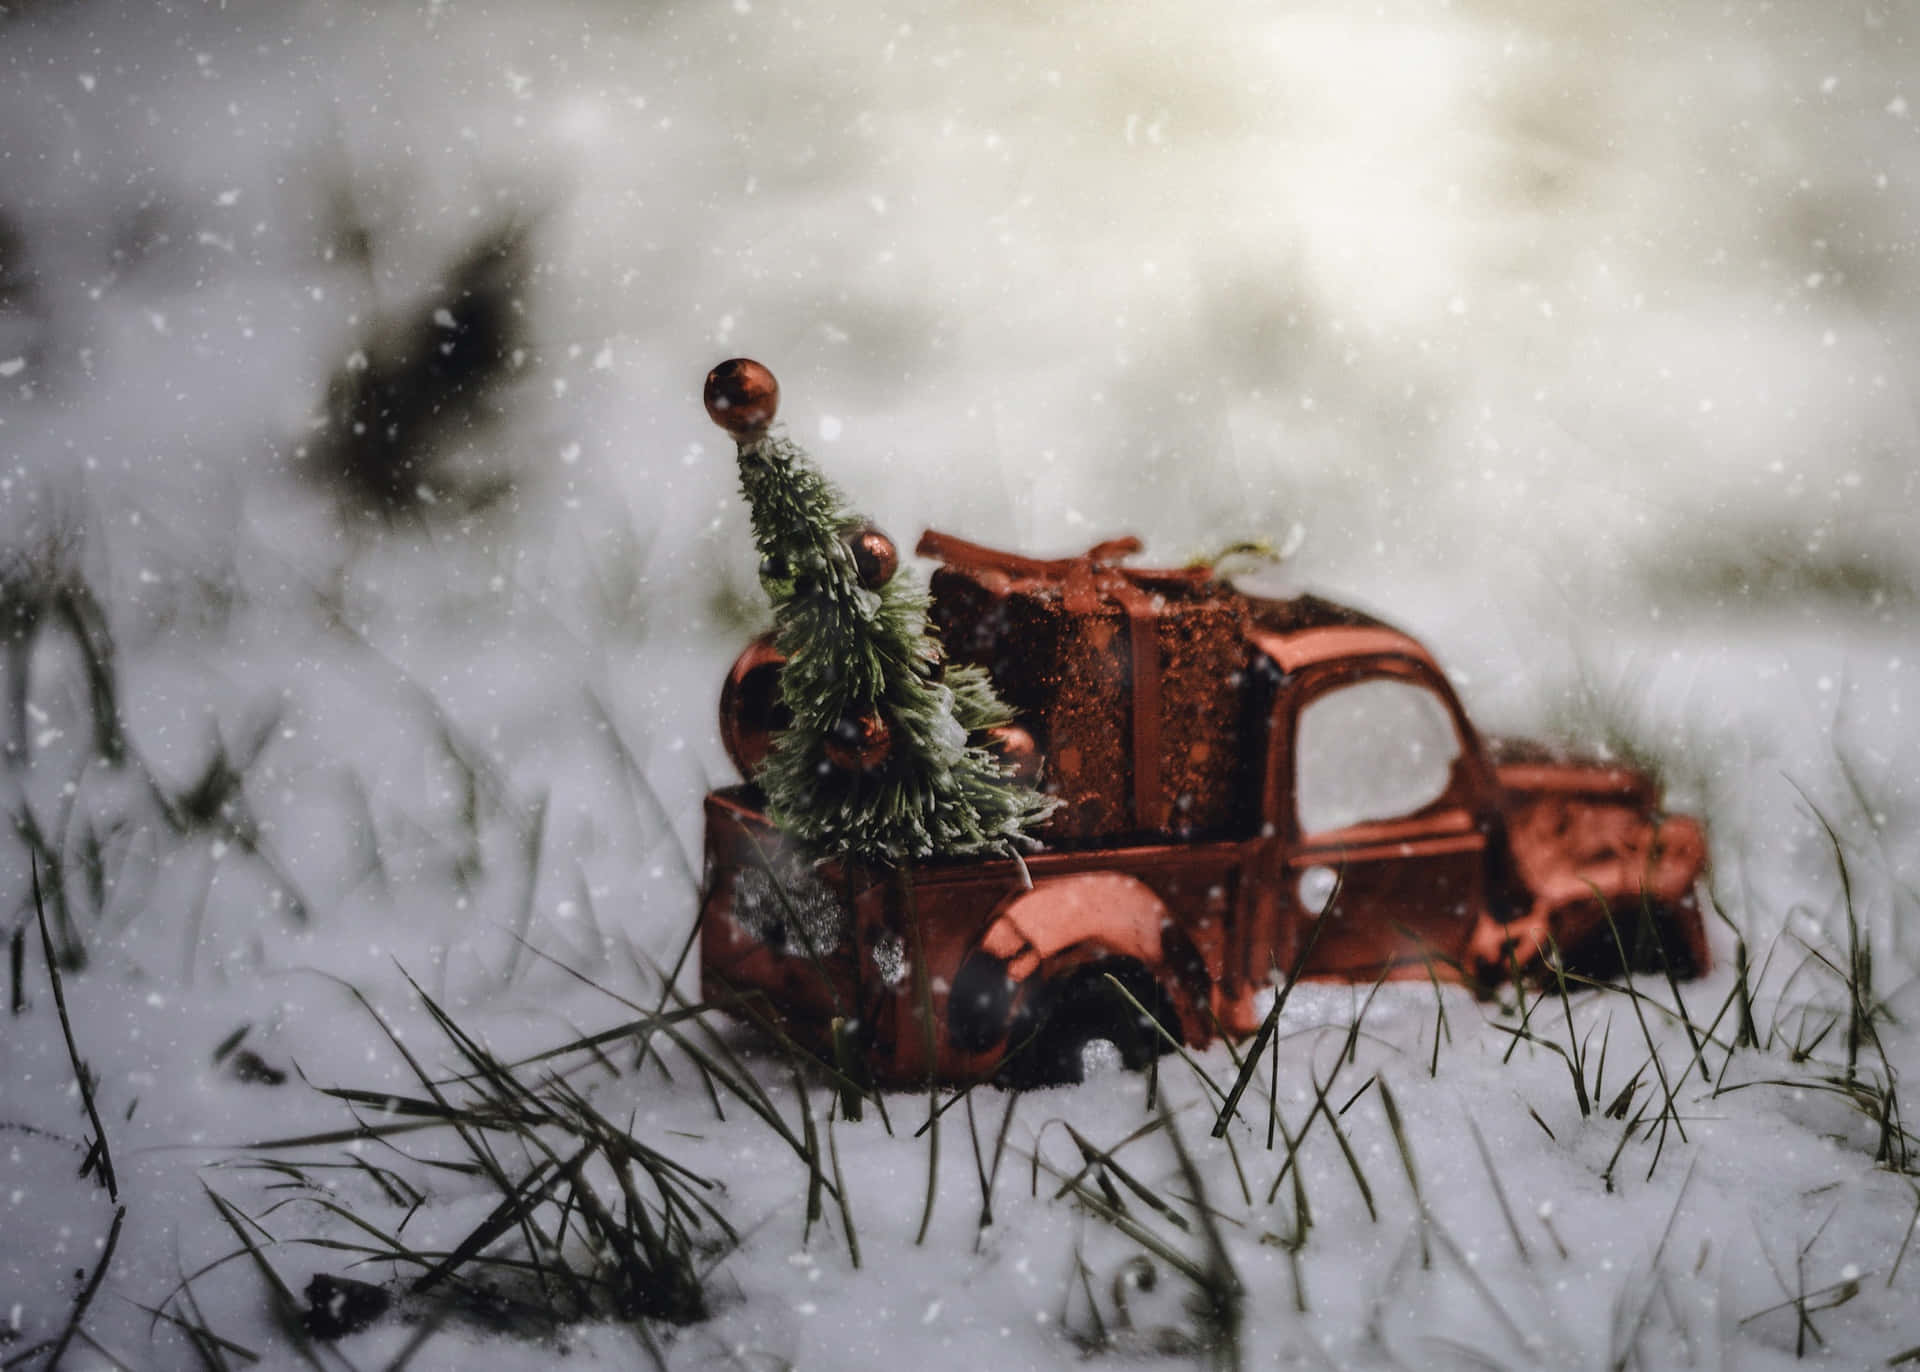 A vintage pickup truck decorated for Christmas. Wallpaper